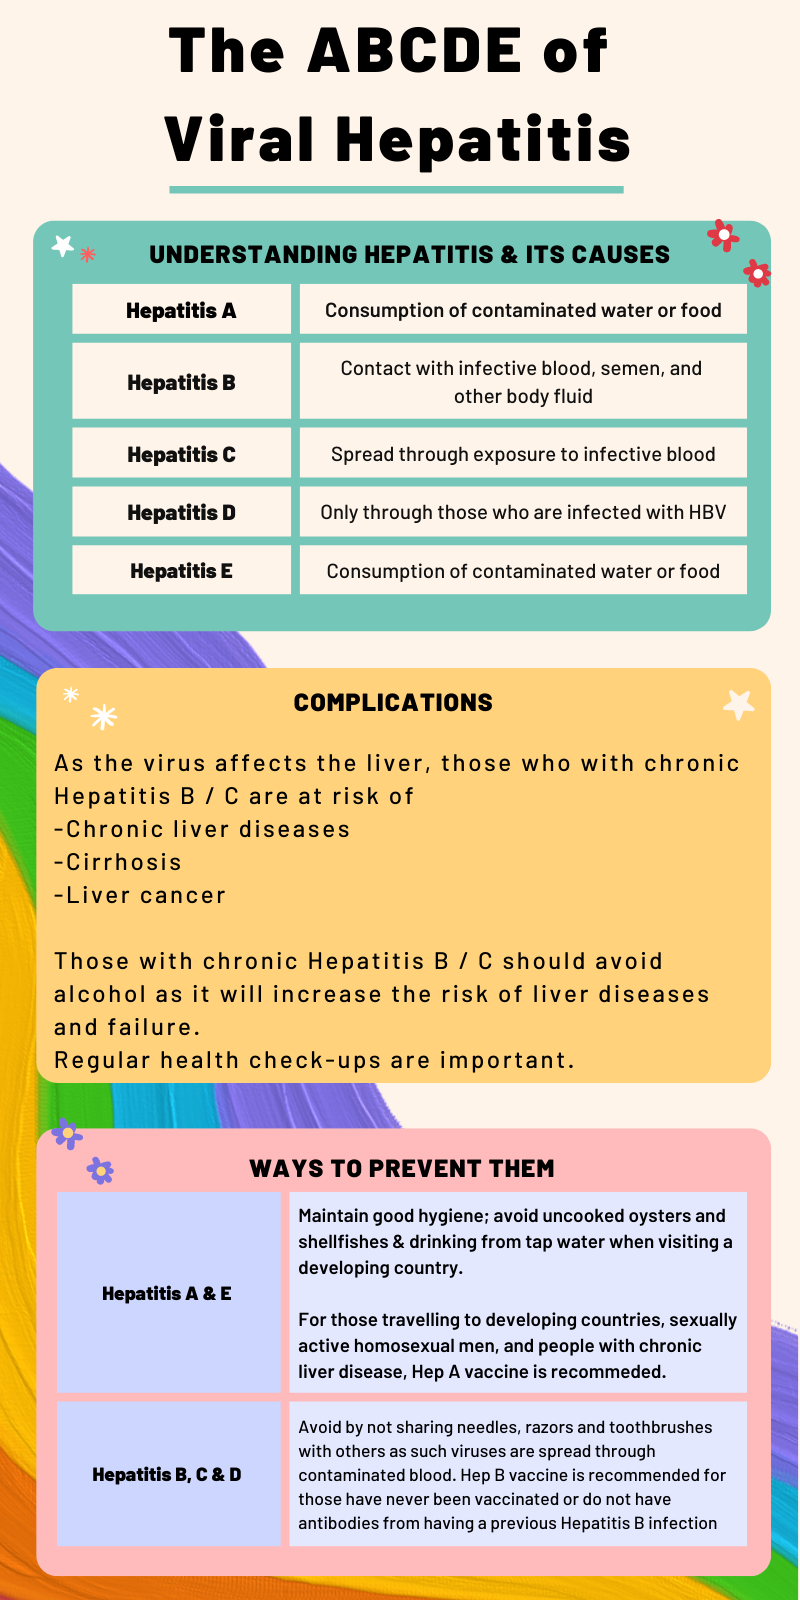 The ABCDE of Viral Hepatitis